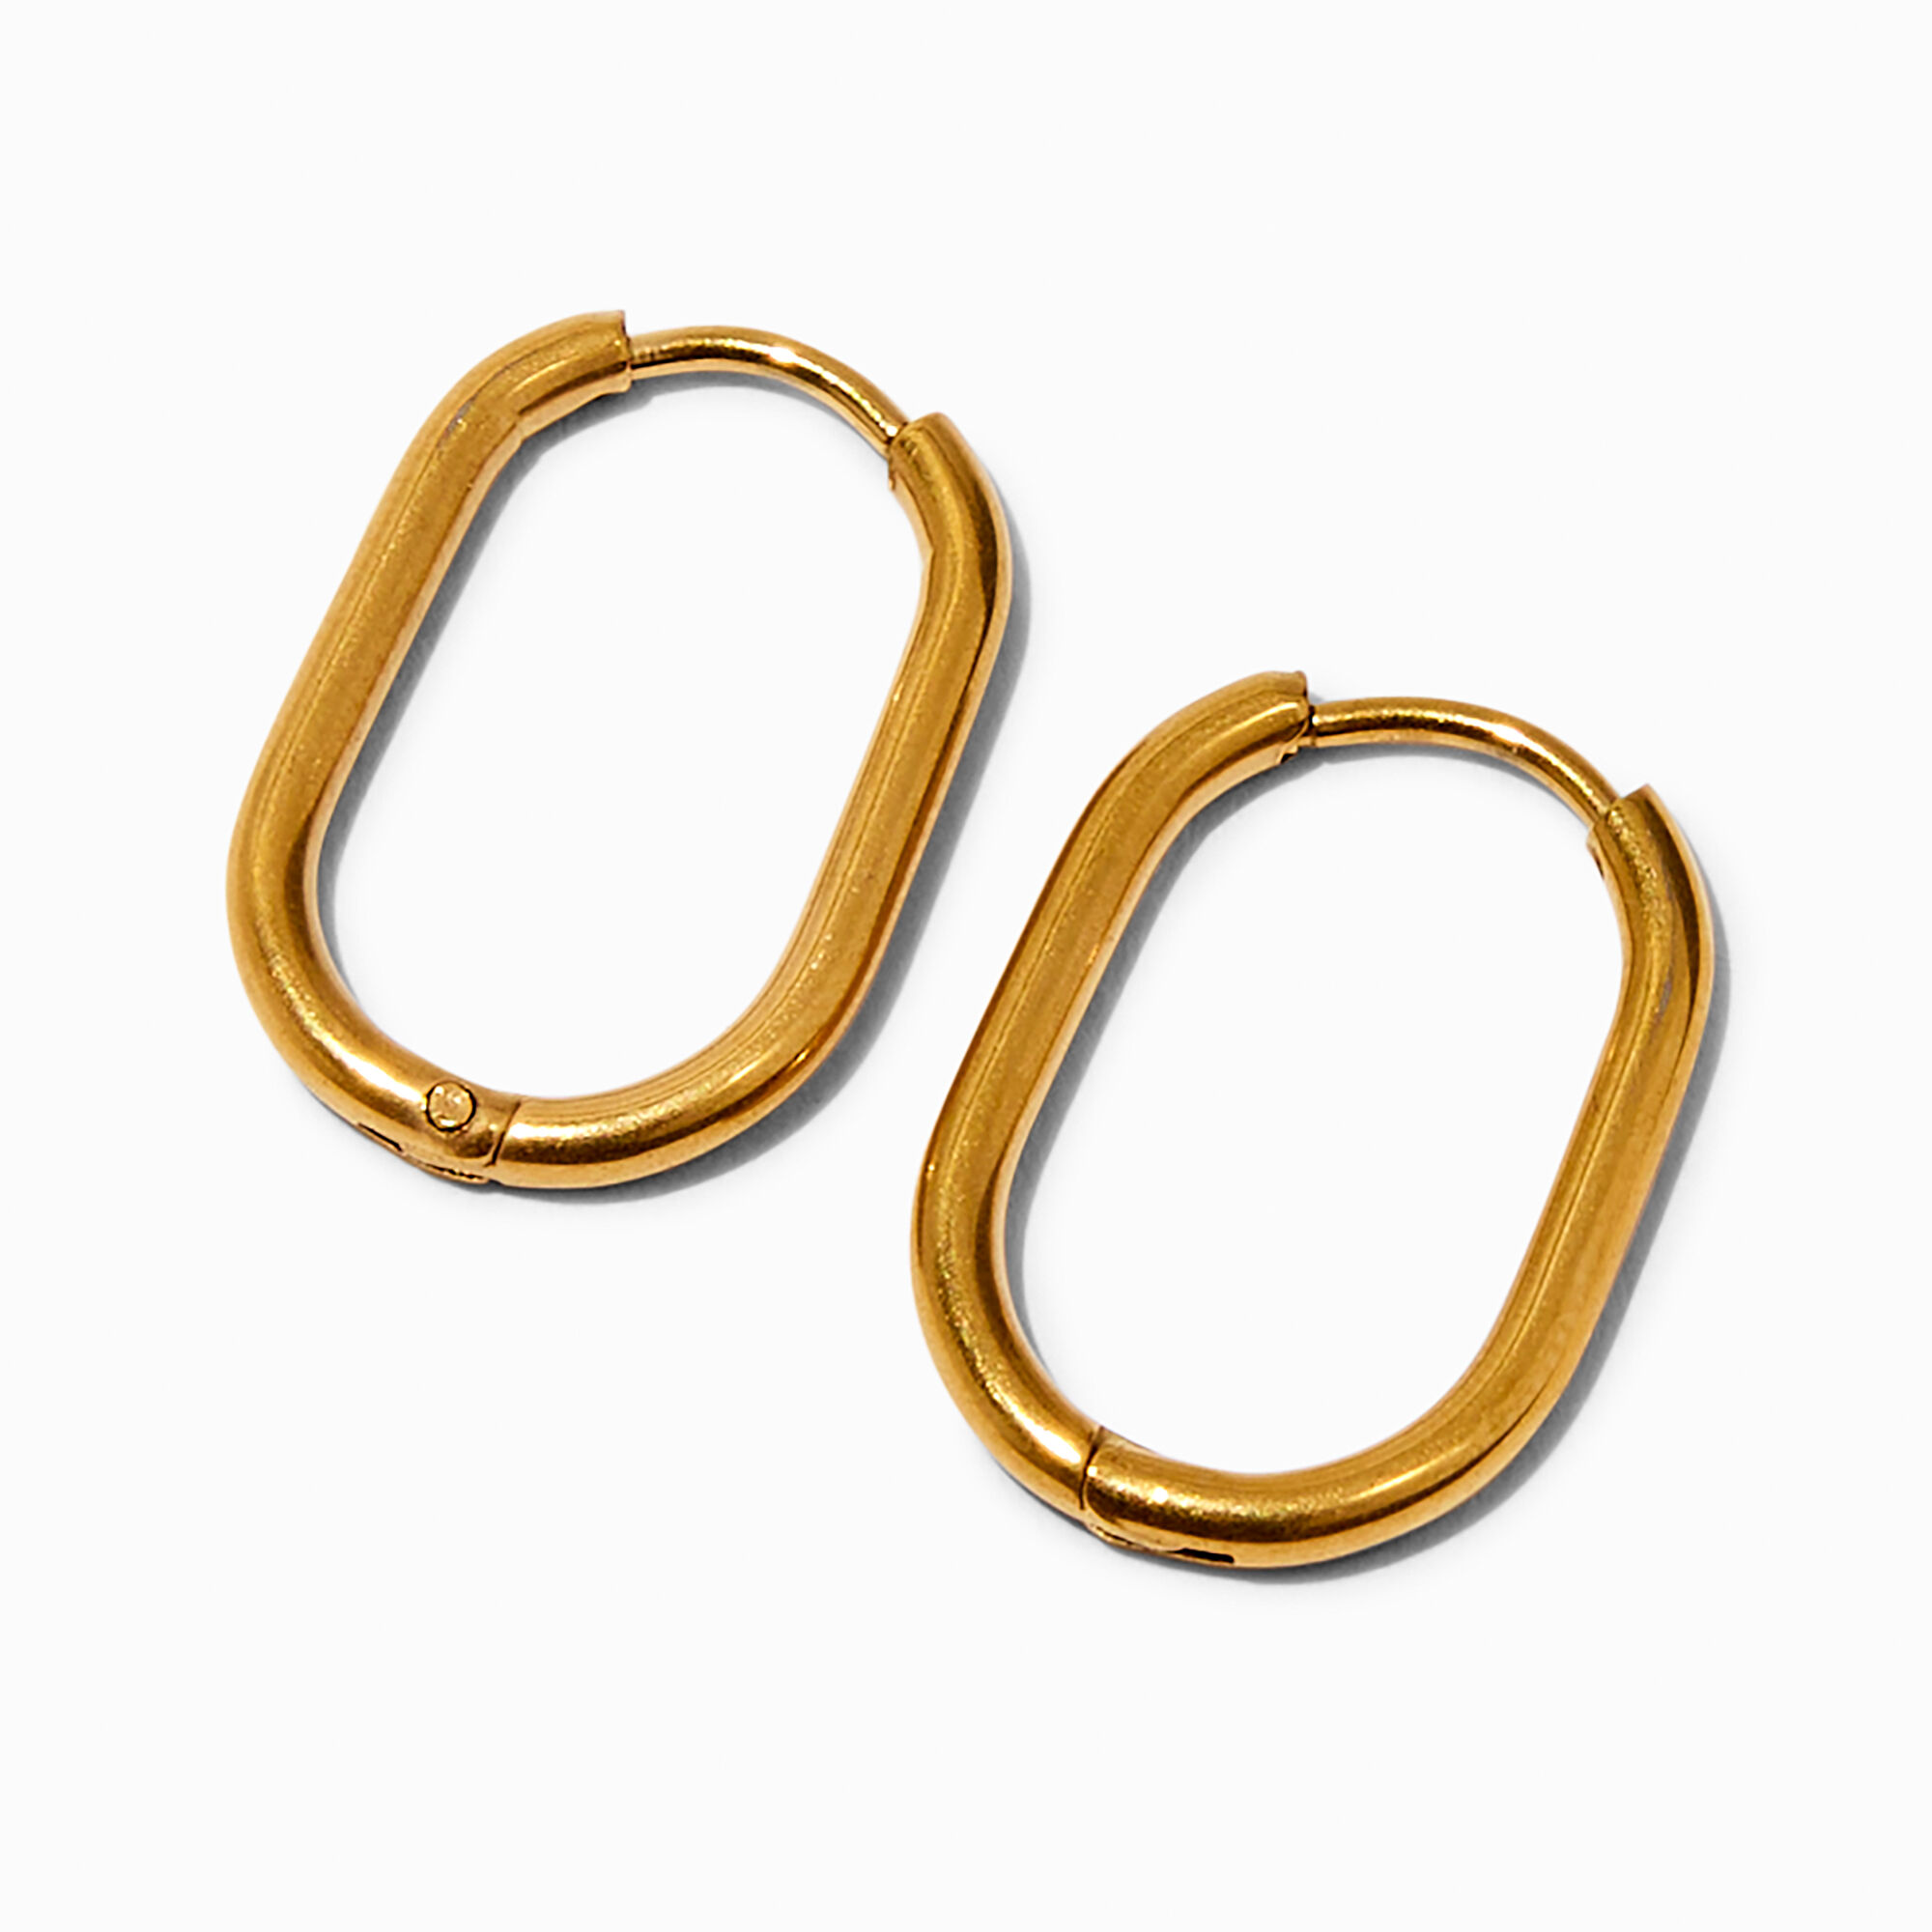 View Claires Tone Stainless Steel 12MM Oval Hoop Earrings Gold information